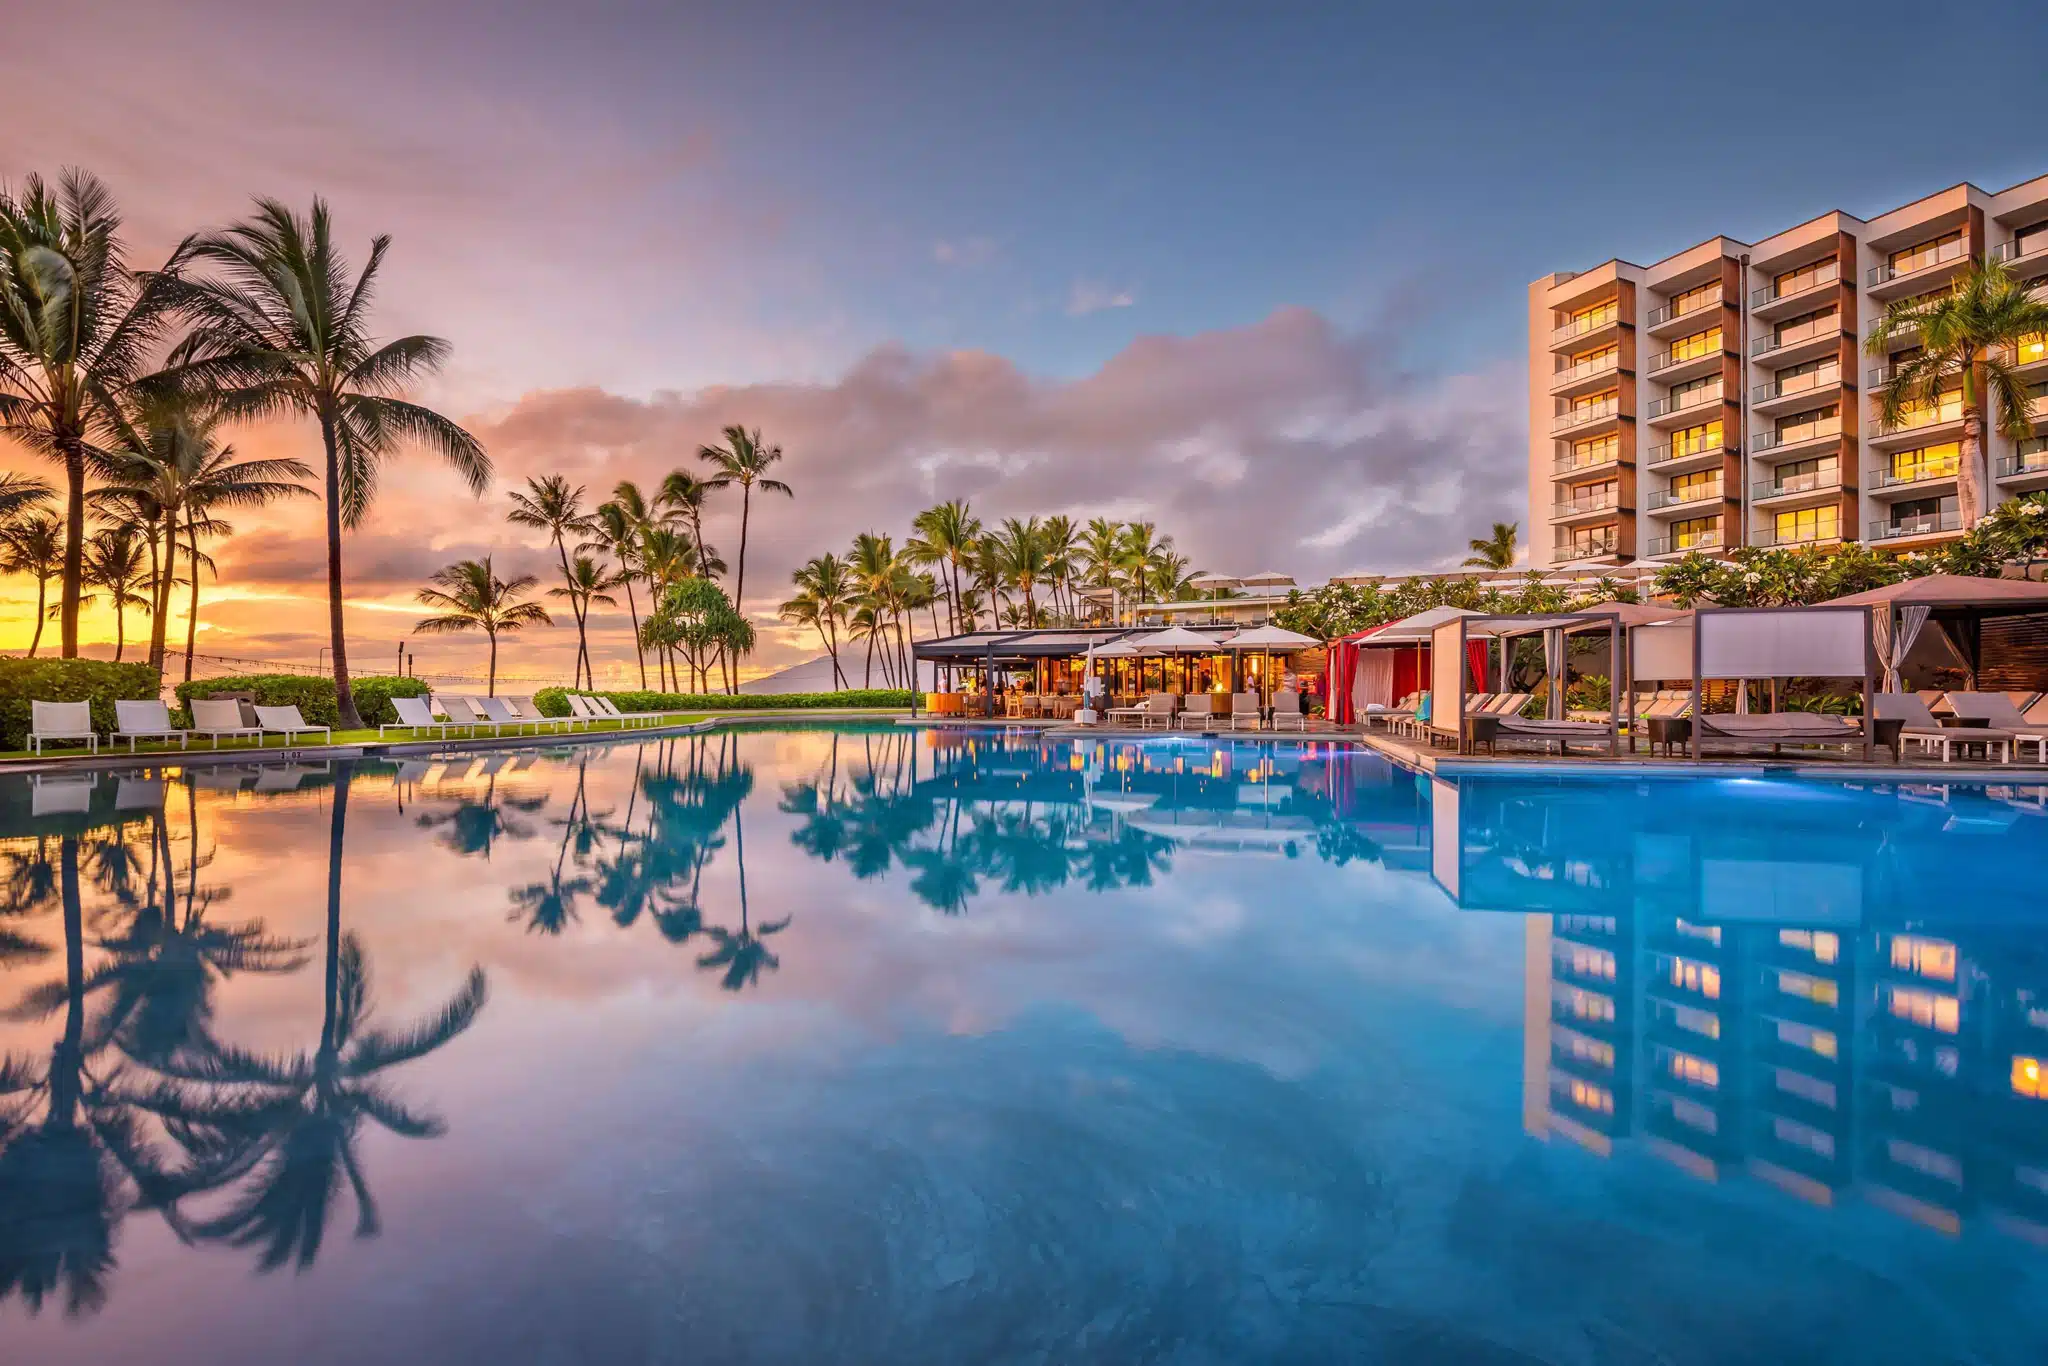 Andaz Maui at Wailea Resort is a Hotel located in the city of Kihei on Maui, Hawaii